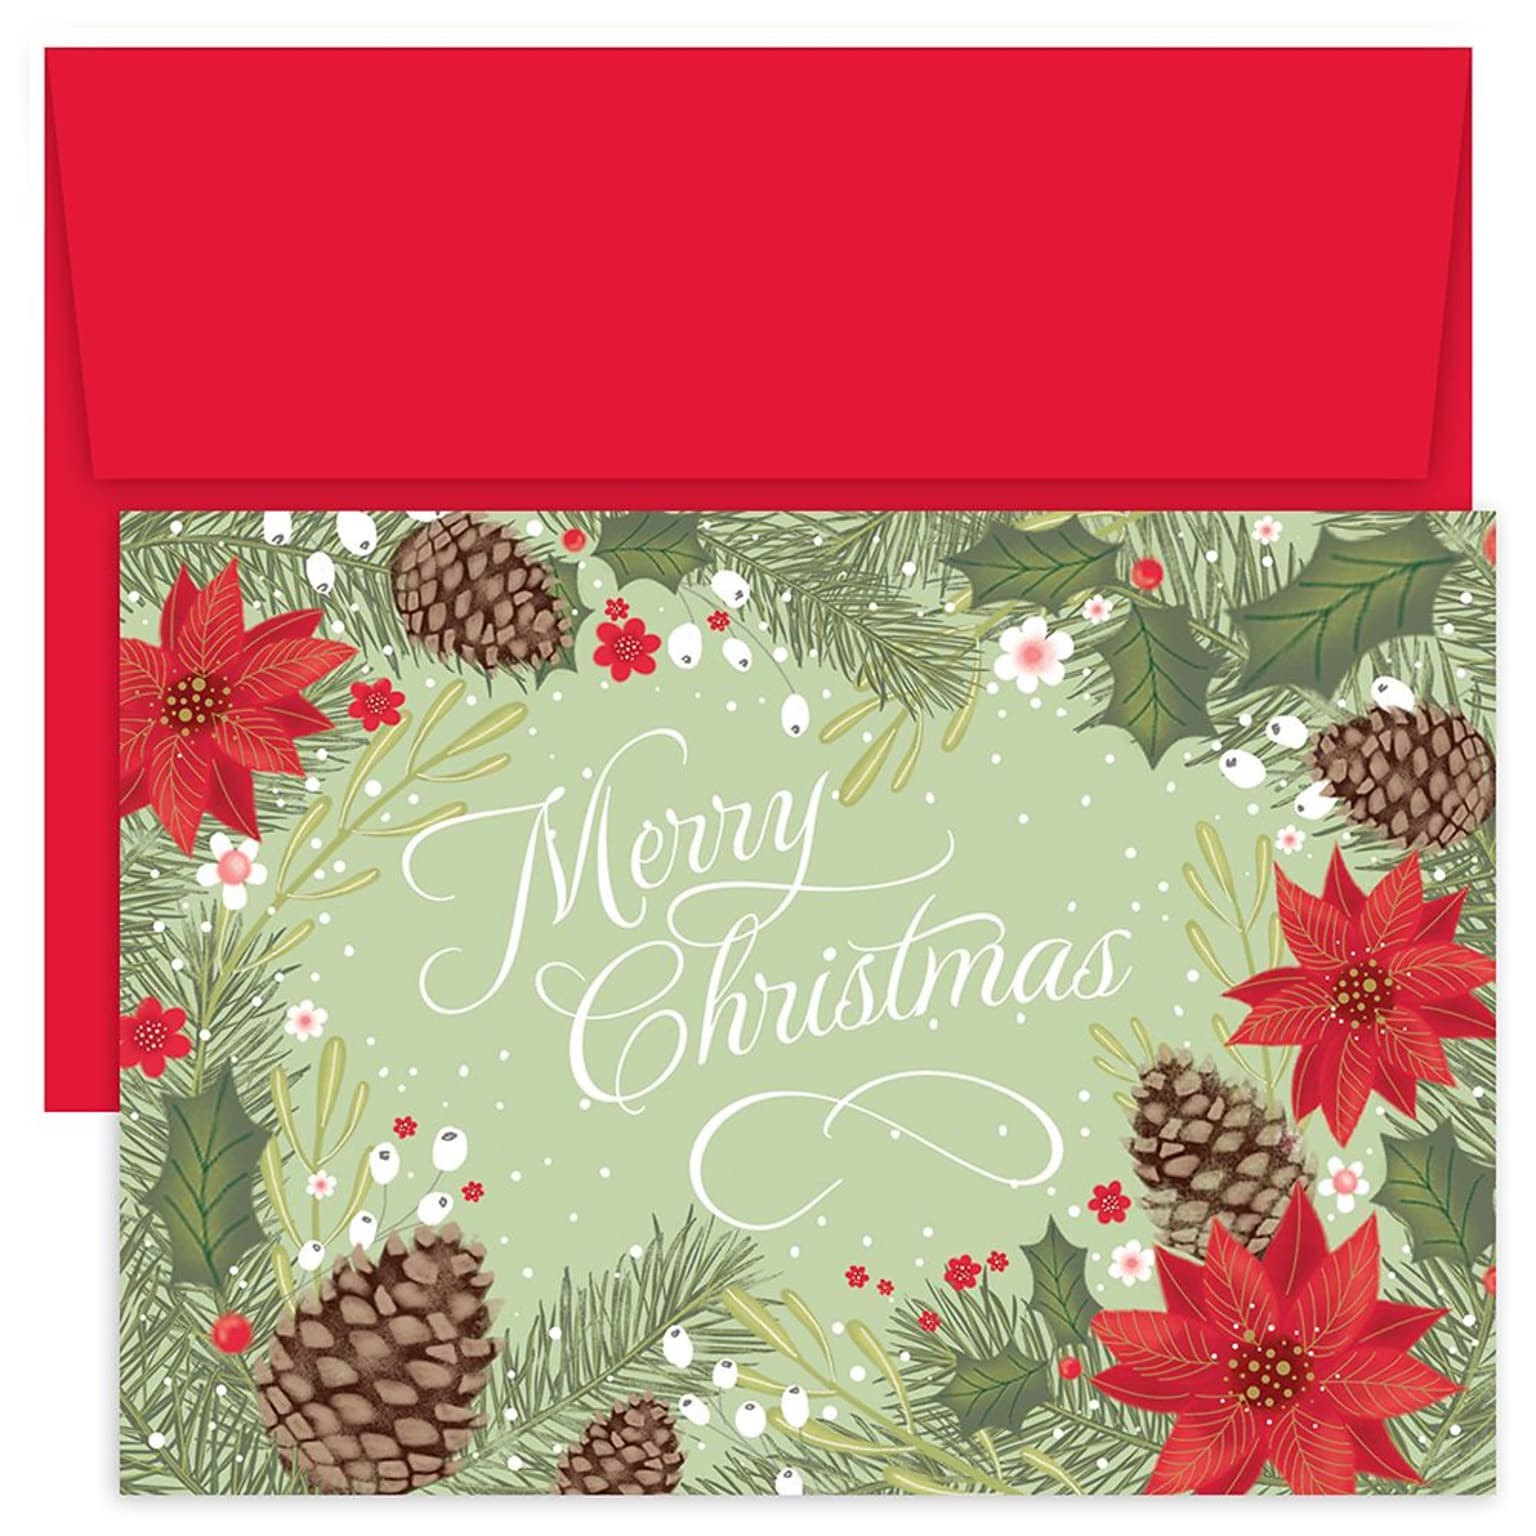 Great Papers!® Holiday Greeting Cards, Poinsettia & Pinecone Border, 7.875 x 5.625, 18 Cards/18 Envelopes (905200)